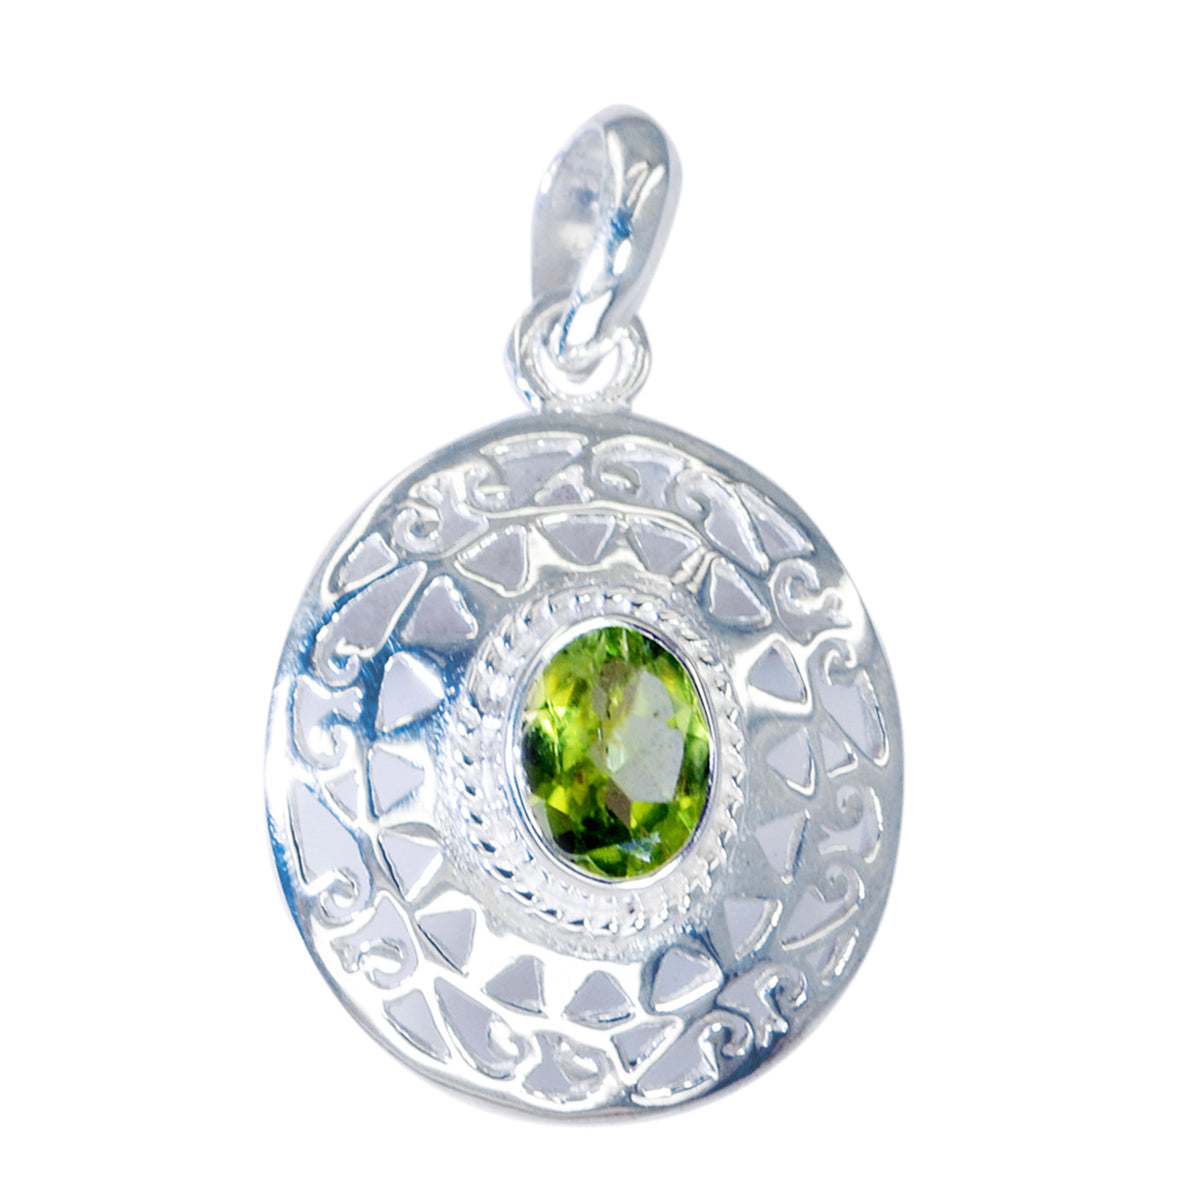 Riyo Handsome Gemstone Round Faceted Green Peridot Sterling Silver Pendant Gift For Friend